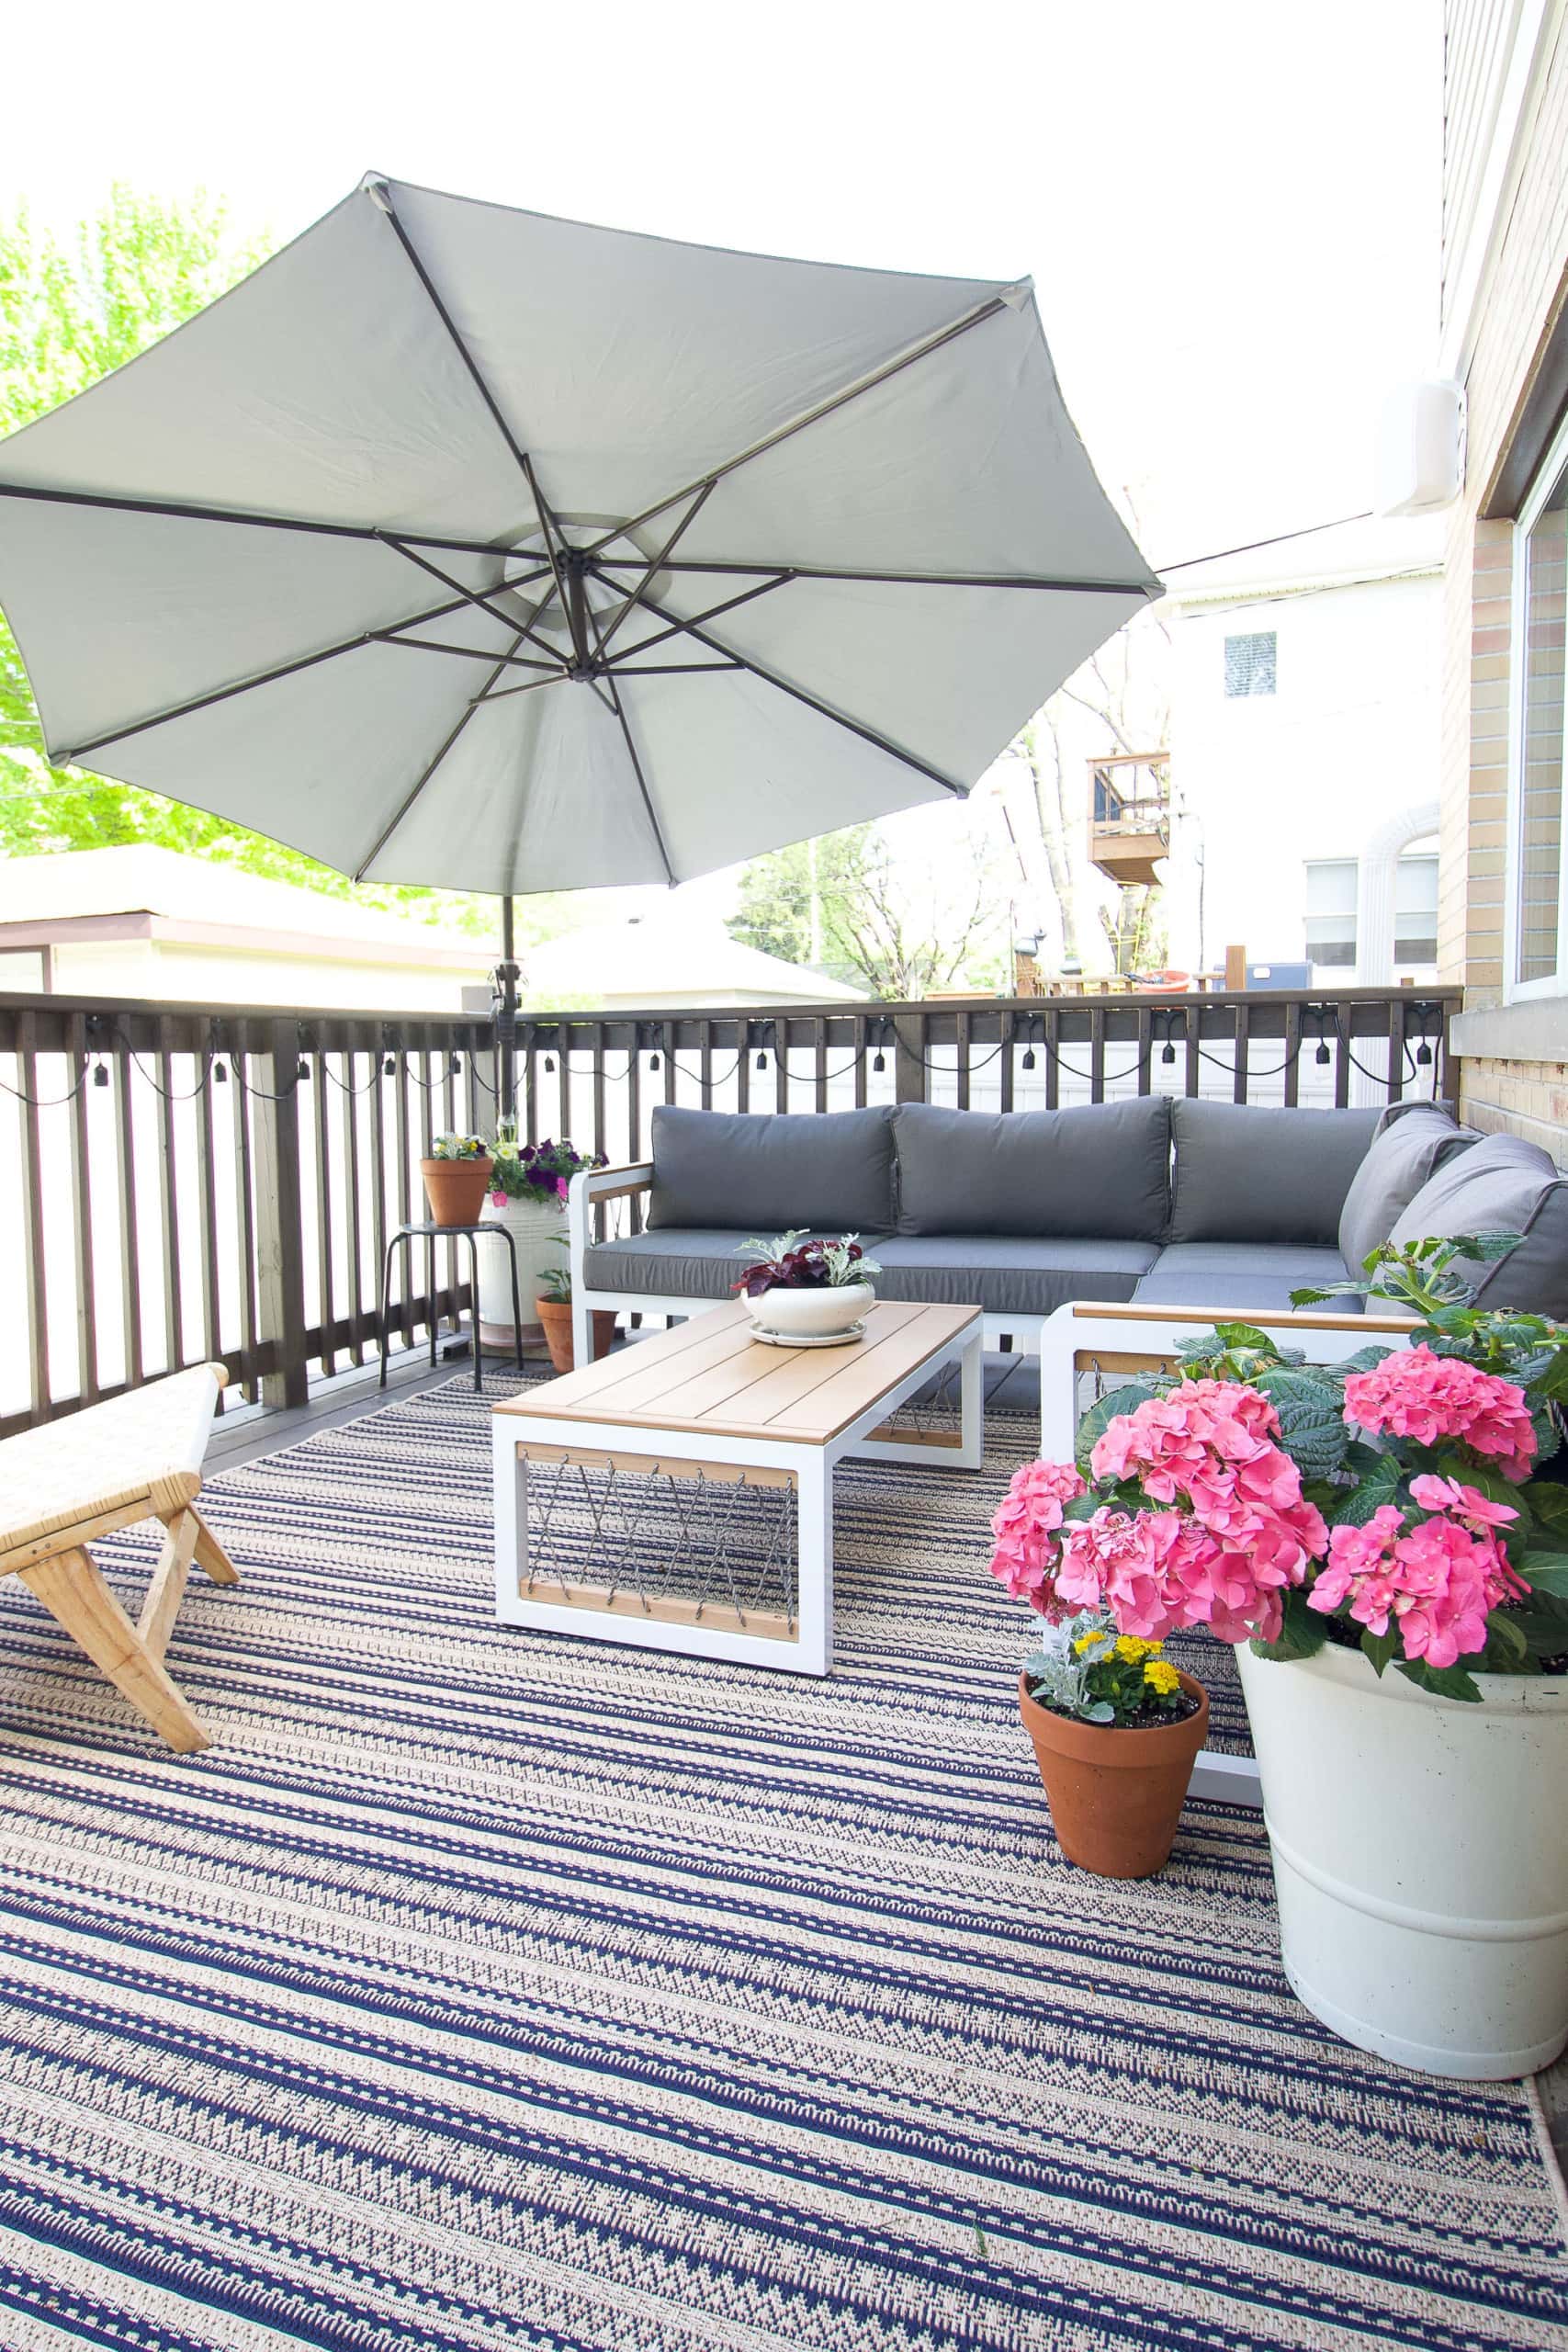 Sharing our deck and patio updates